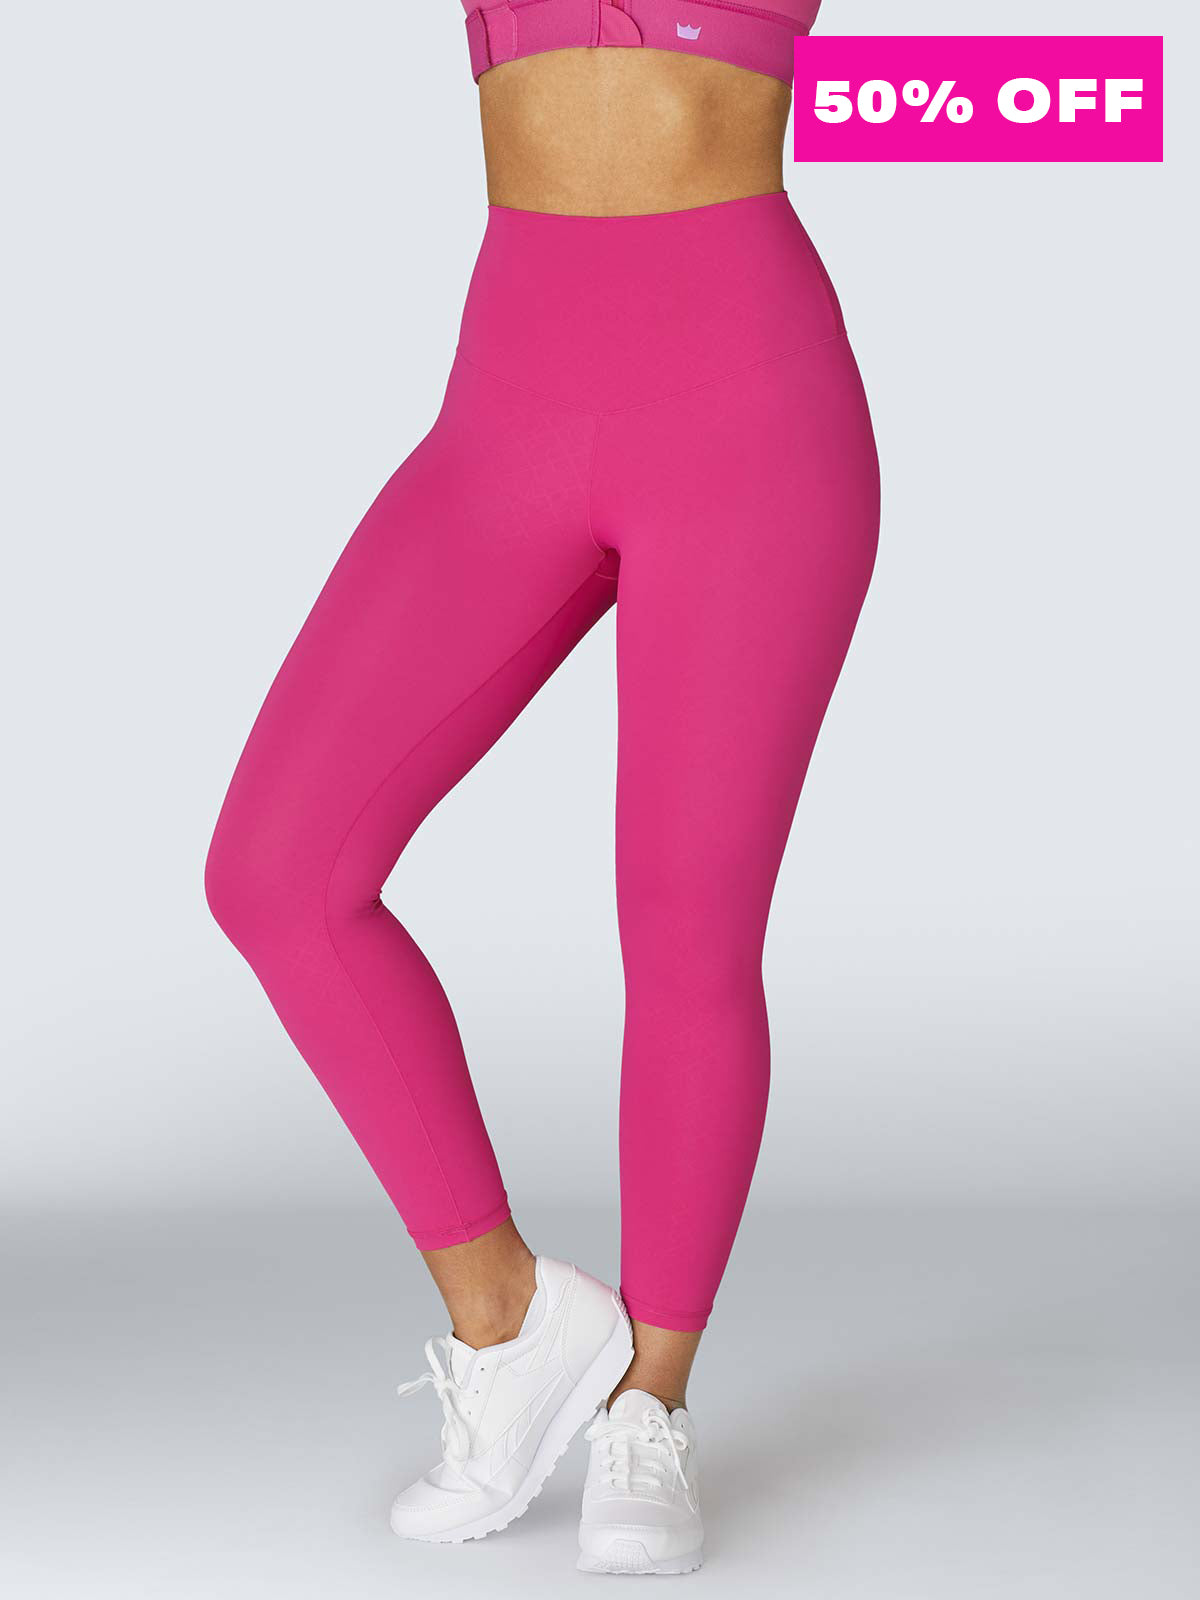 Women's Cardio Fitness High-Waisted Shaping Short Leggings - Pink